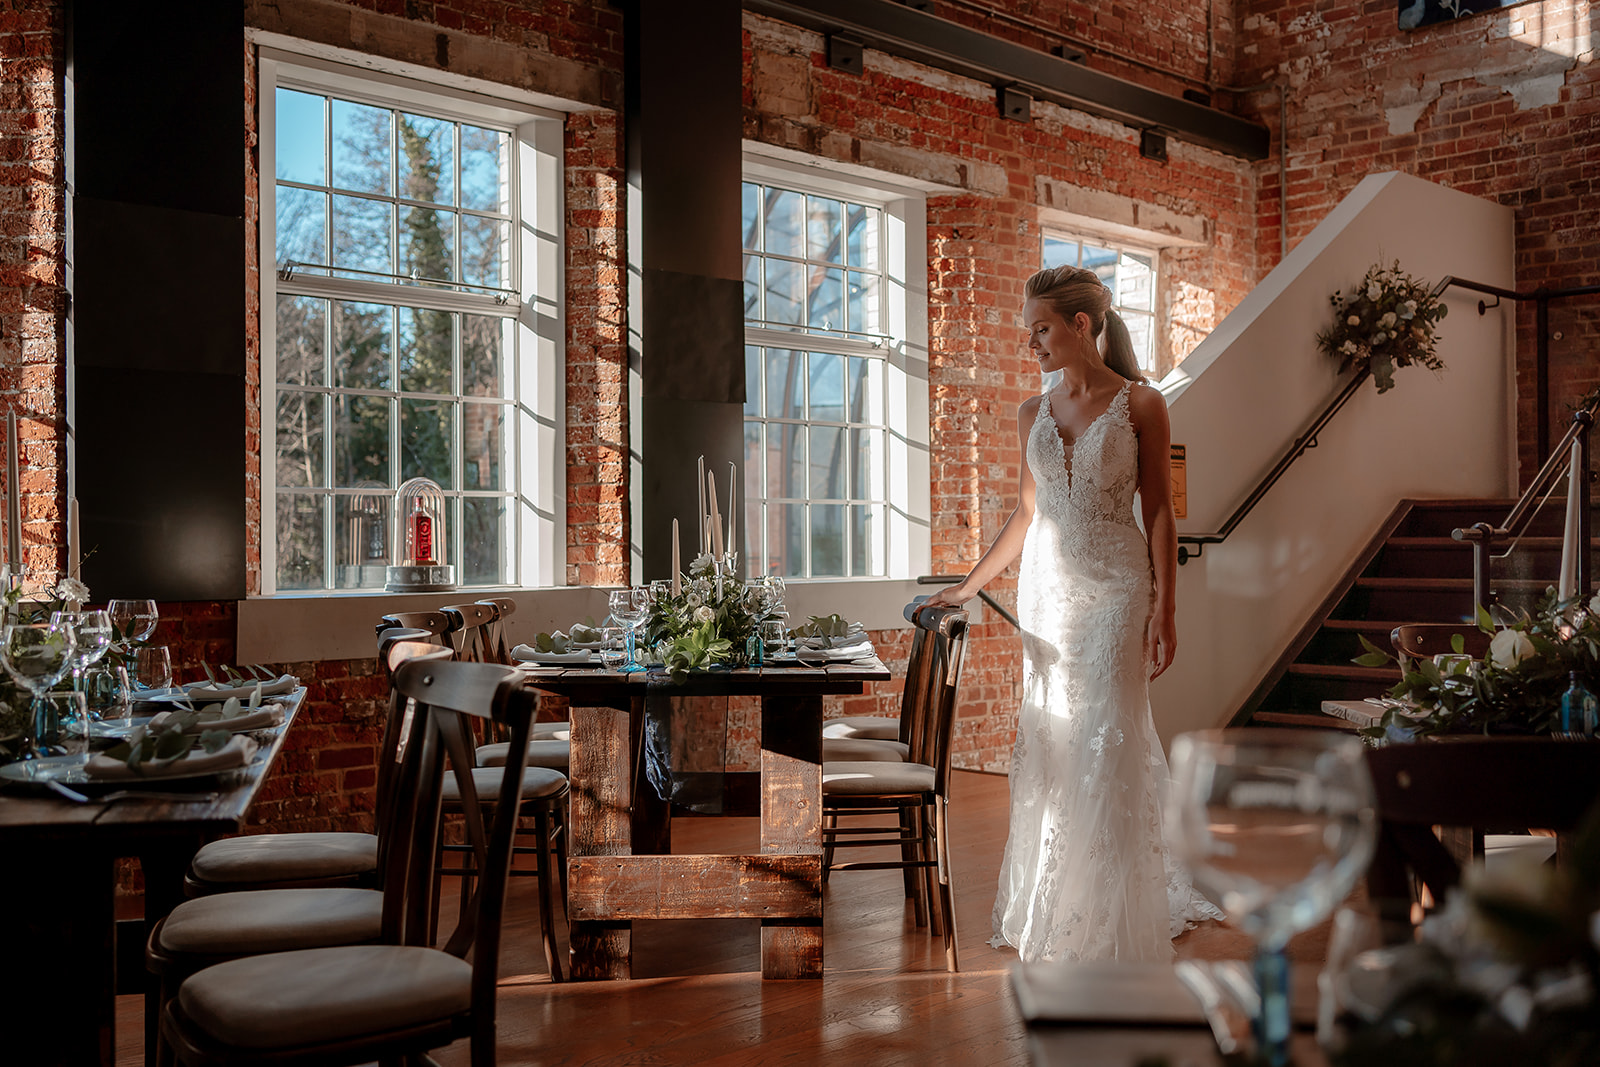 A bride in a white lace fit and flare dress walks between tables in the wedding reception room at Bombay Sapphire